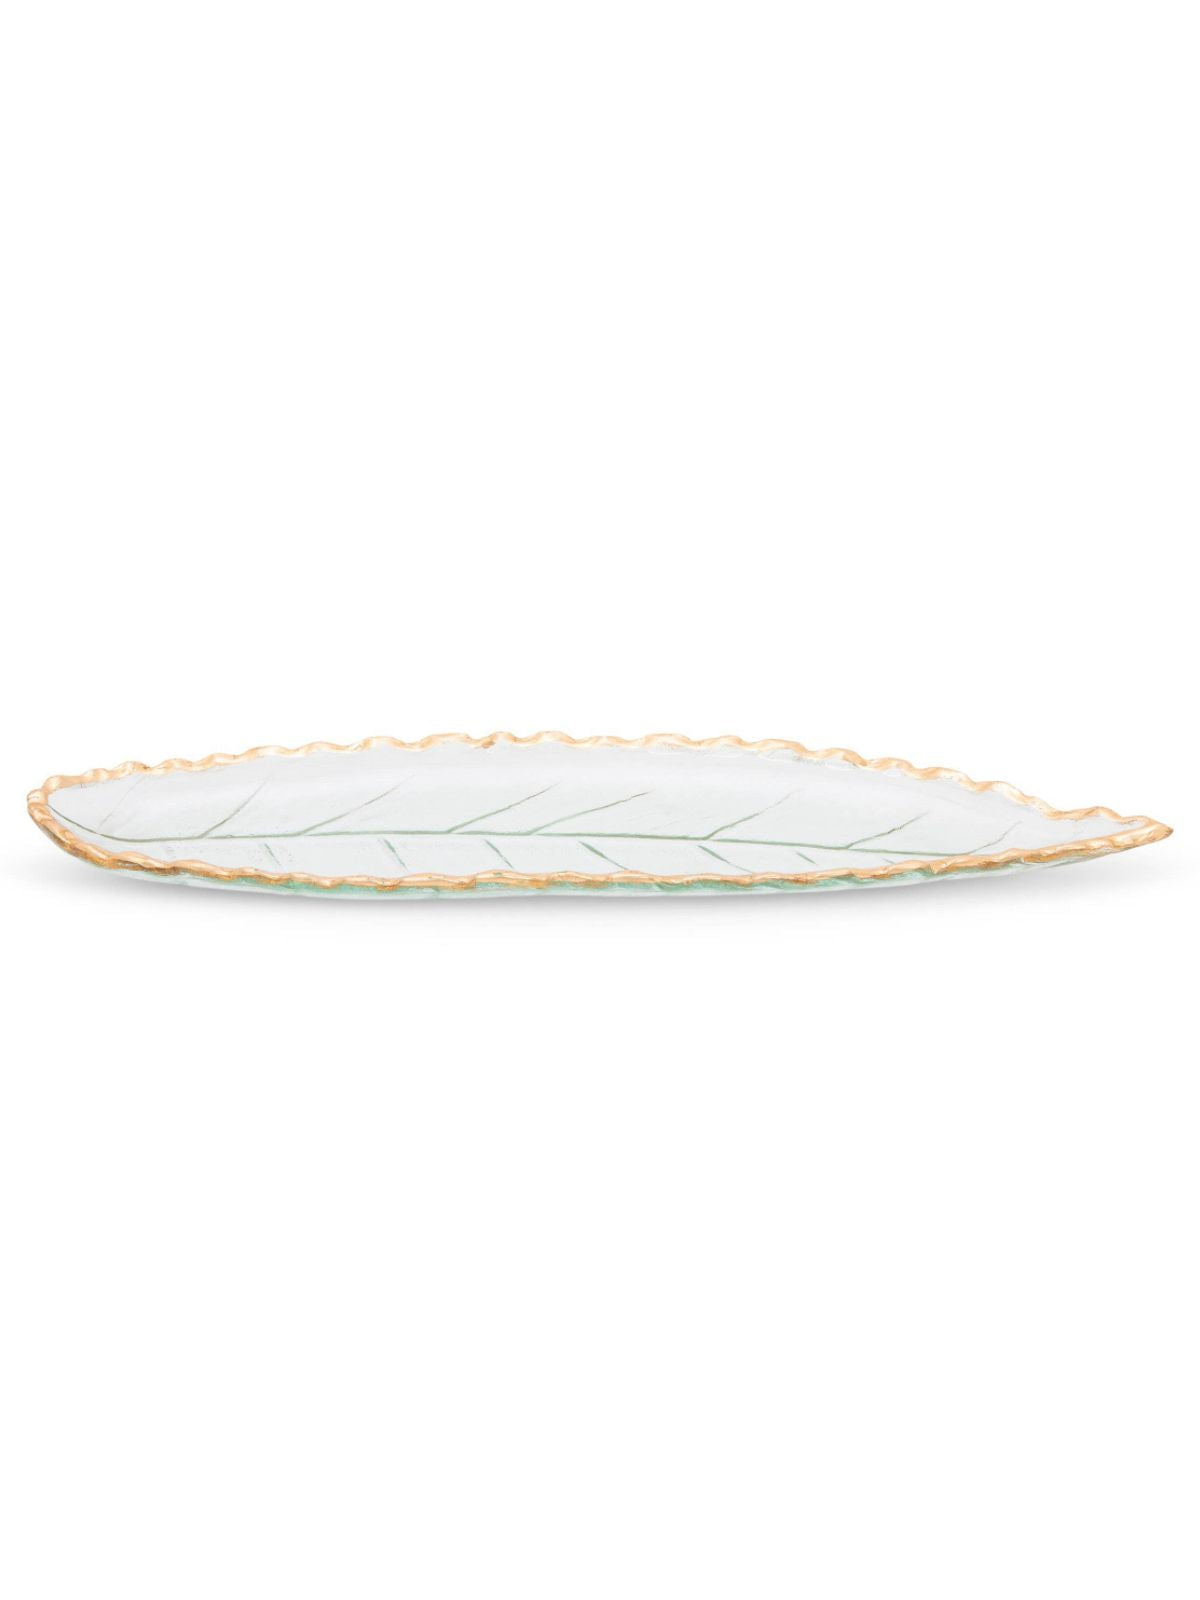 This leaf shaped tray is uniquely designed to add a romantic and elegant look to your table settings. It is beautifully designed with some glossy gold rim to add that extra bit of elegance to your table. 